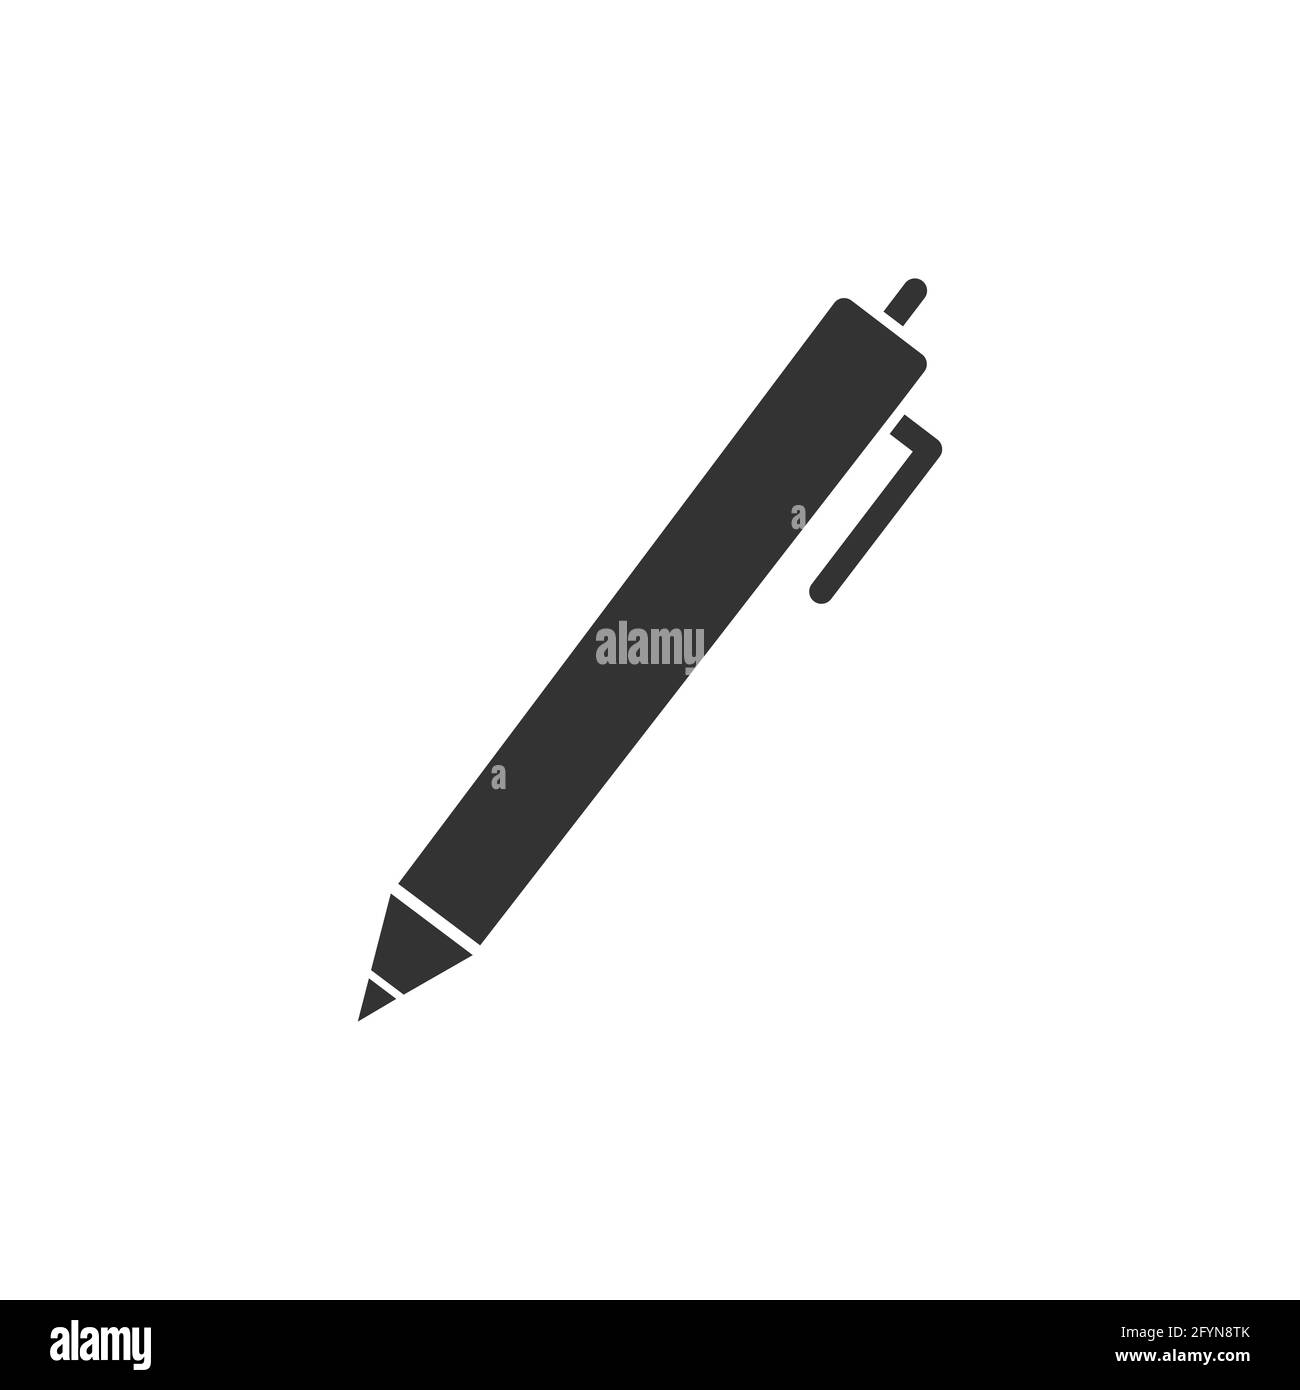 Pen icon. Business symbol. Pencil black silhouette. Vector illustration isolated on white Stock Vector